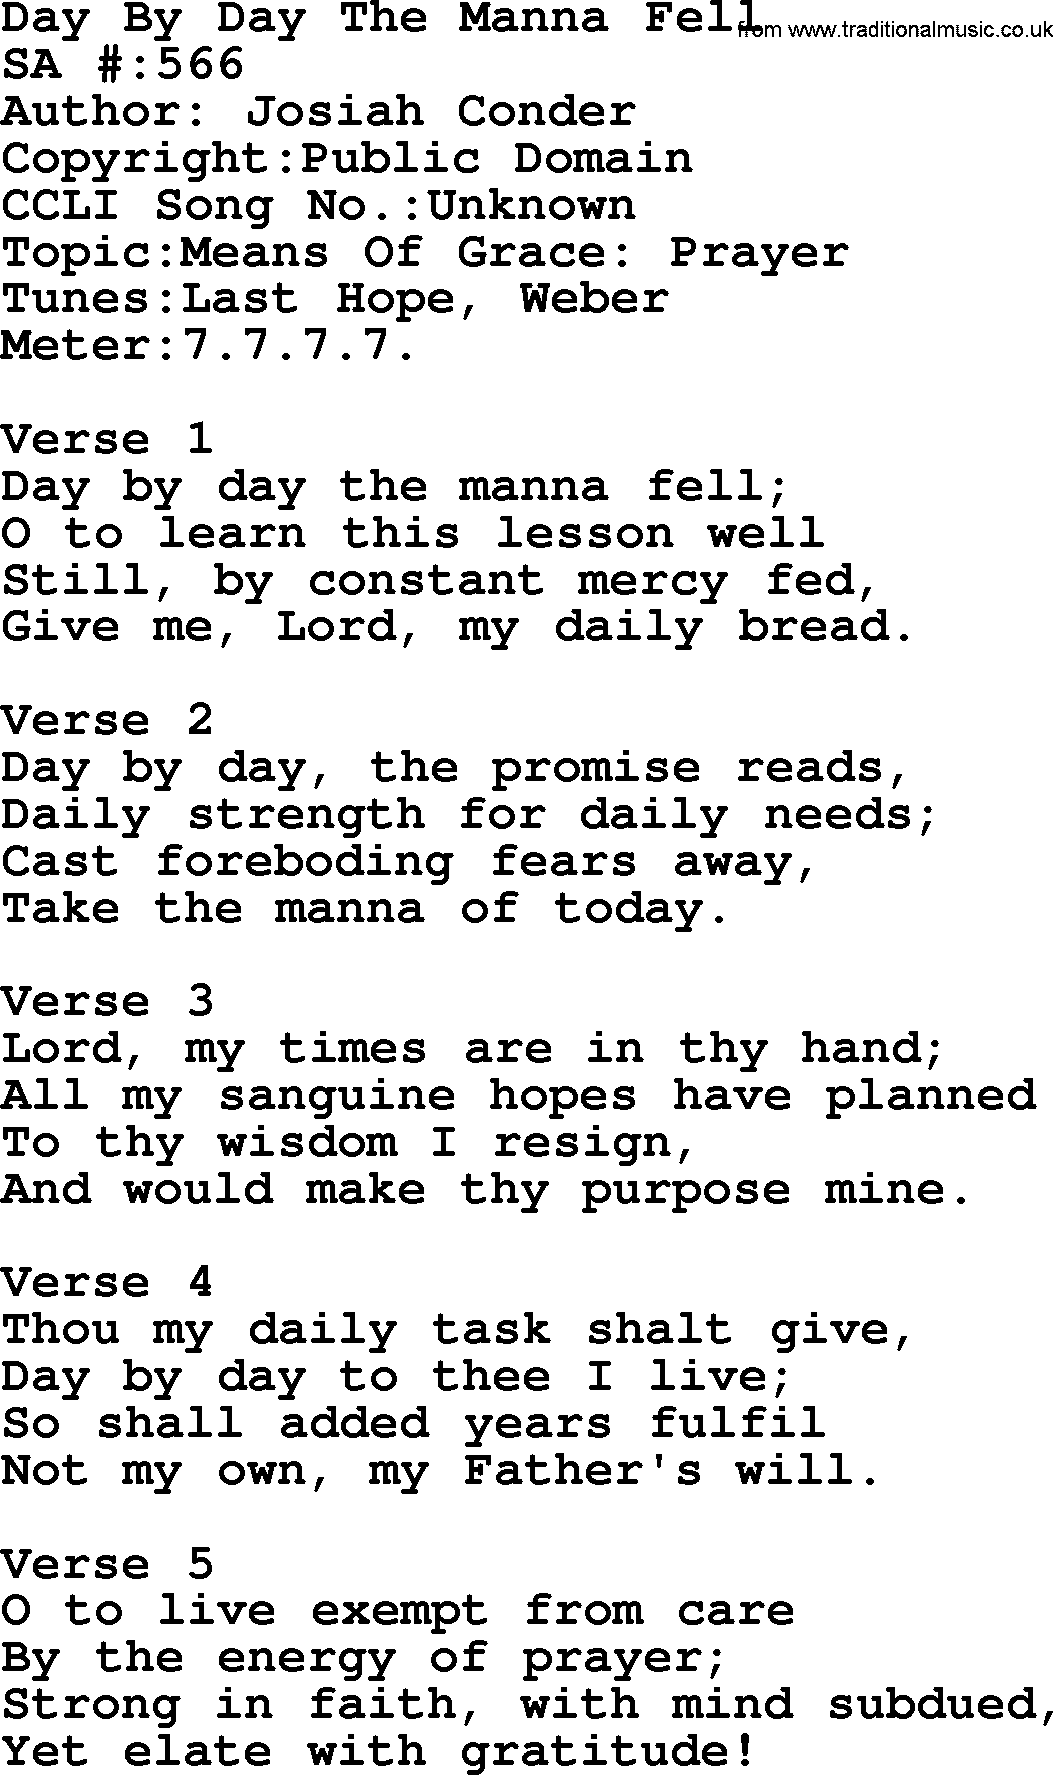 Salvation Army Hymnal, title: Day By Day The Manna Fell, with lyrics and PDF,